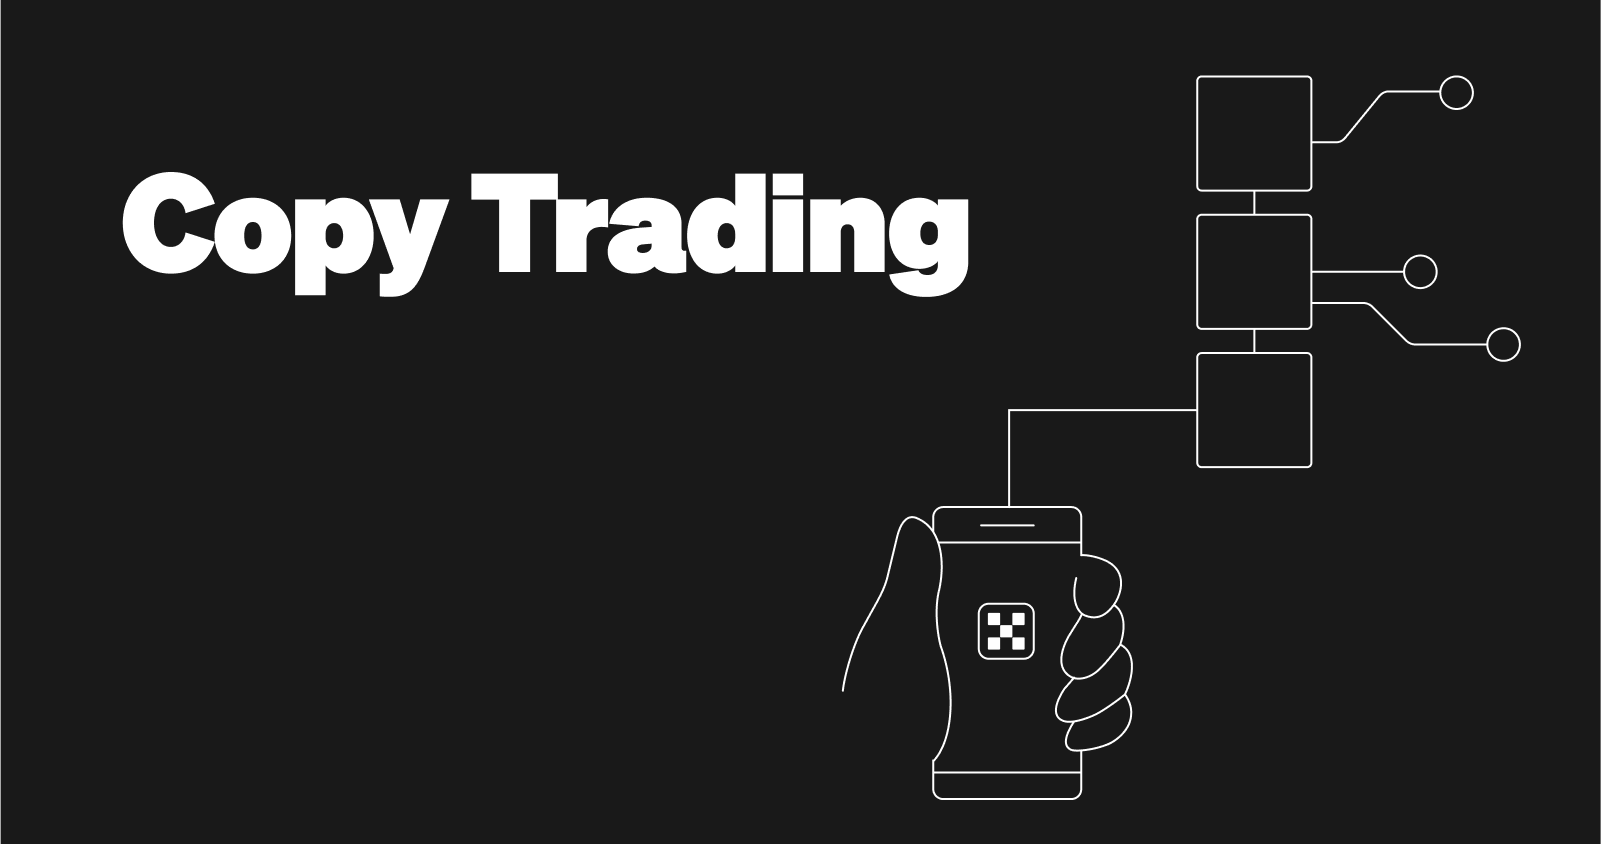 Copy trading explained: Analyzing the tactic's advantages and limitations